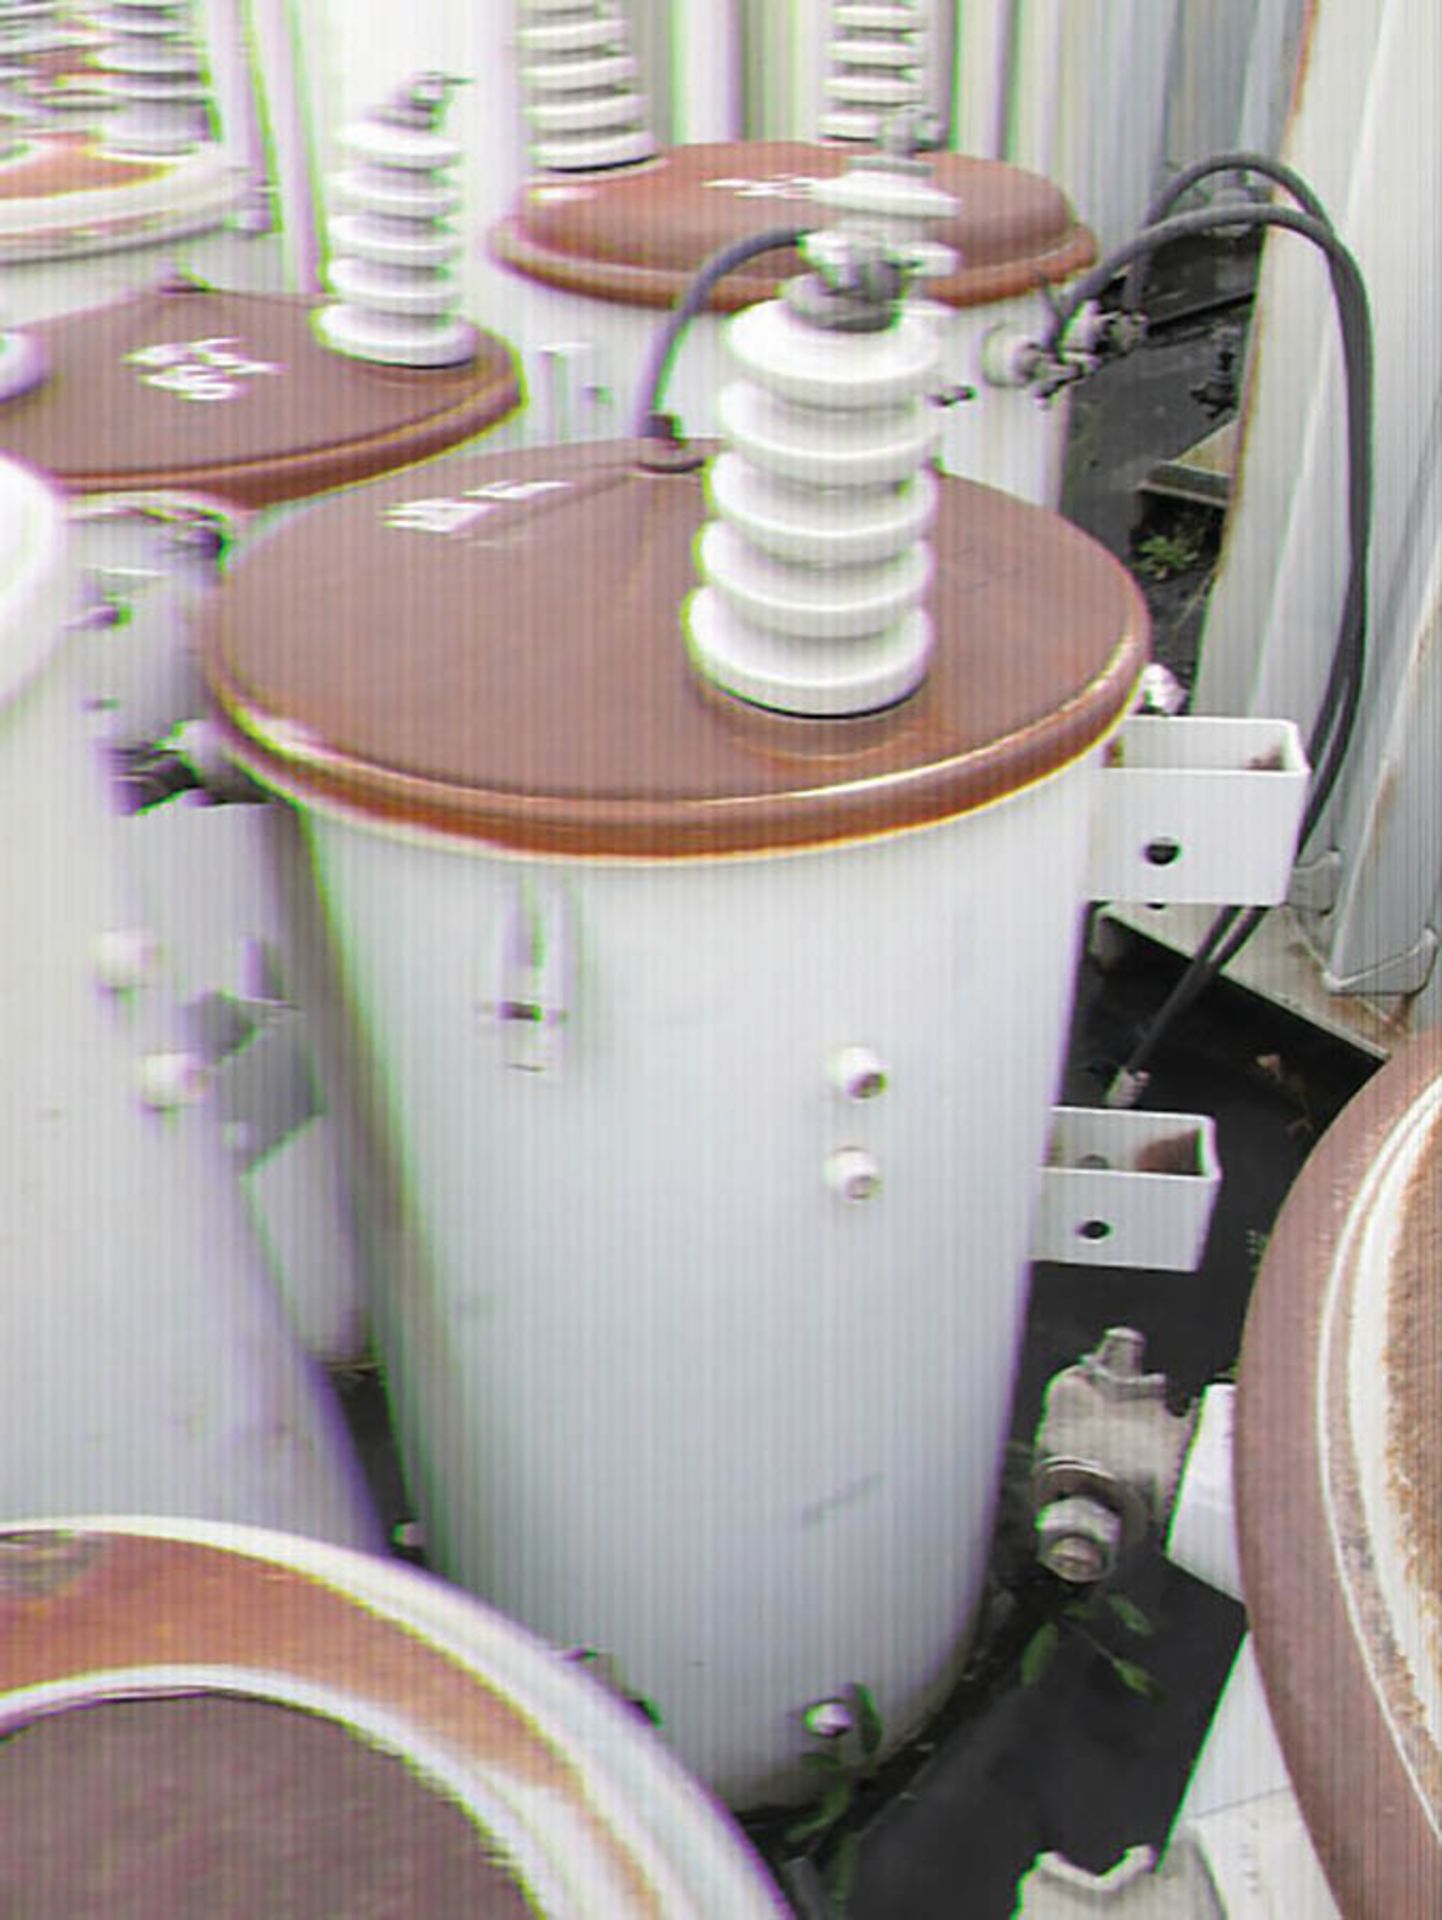 UNITED UTILITY SUPPLY 37.5 KVA DISTRIBUTION TRANSFORMER, S/N 577450AA, 7,200/12,470 HV., 120/240 - Image 2 of 2